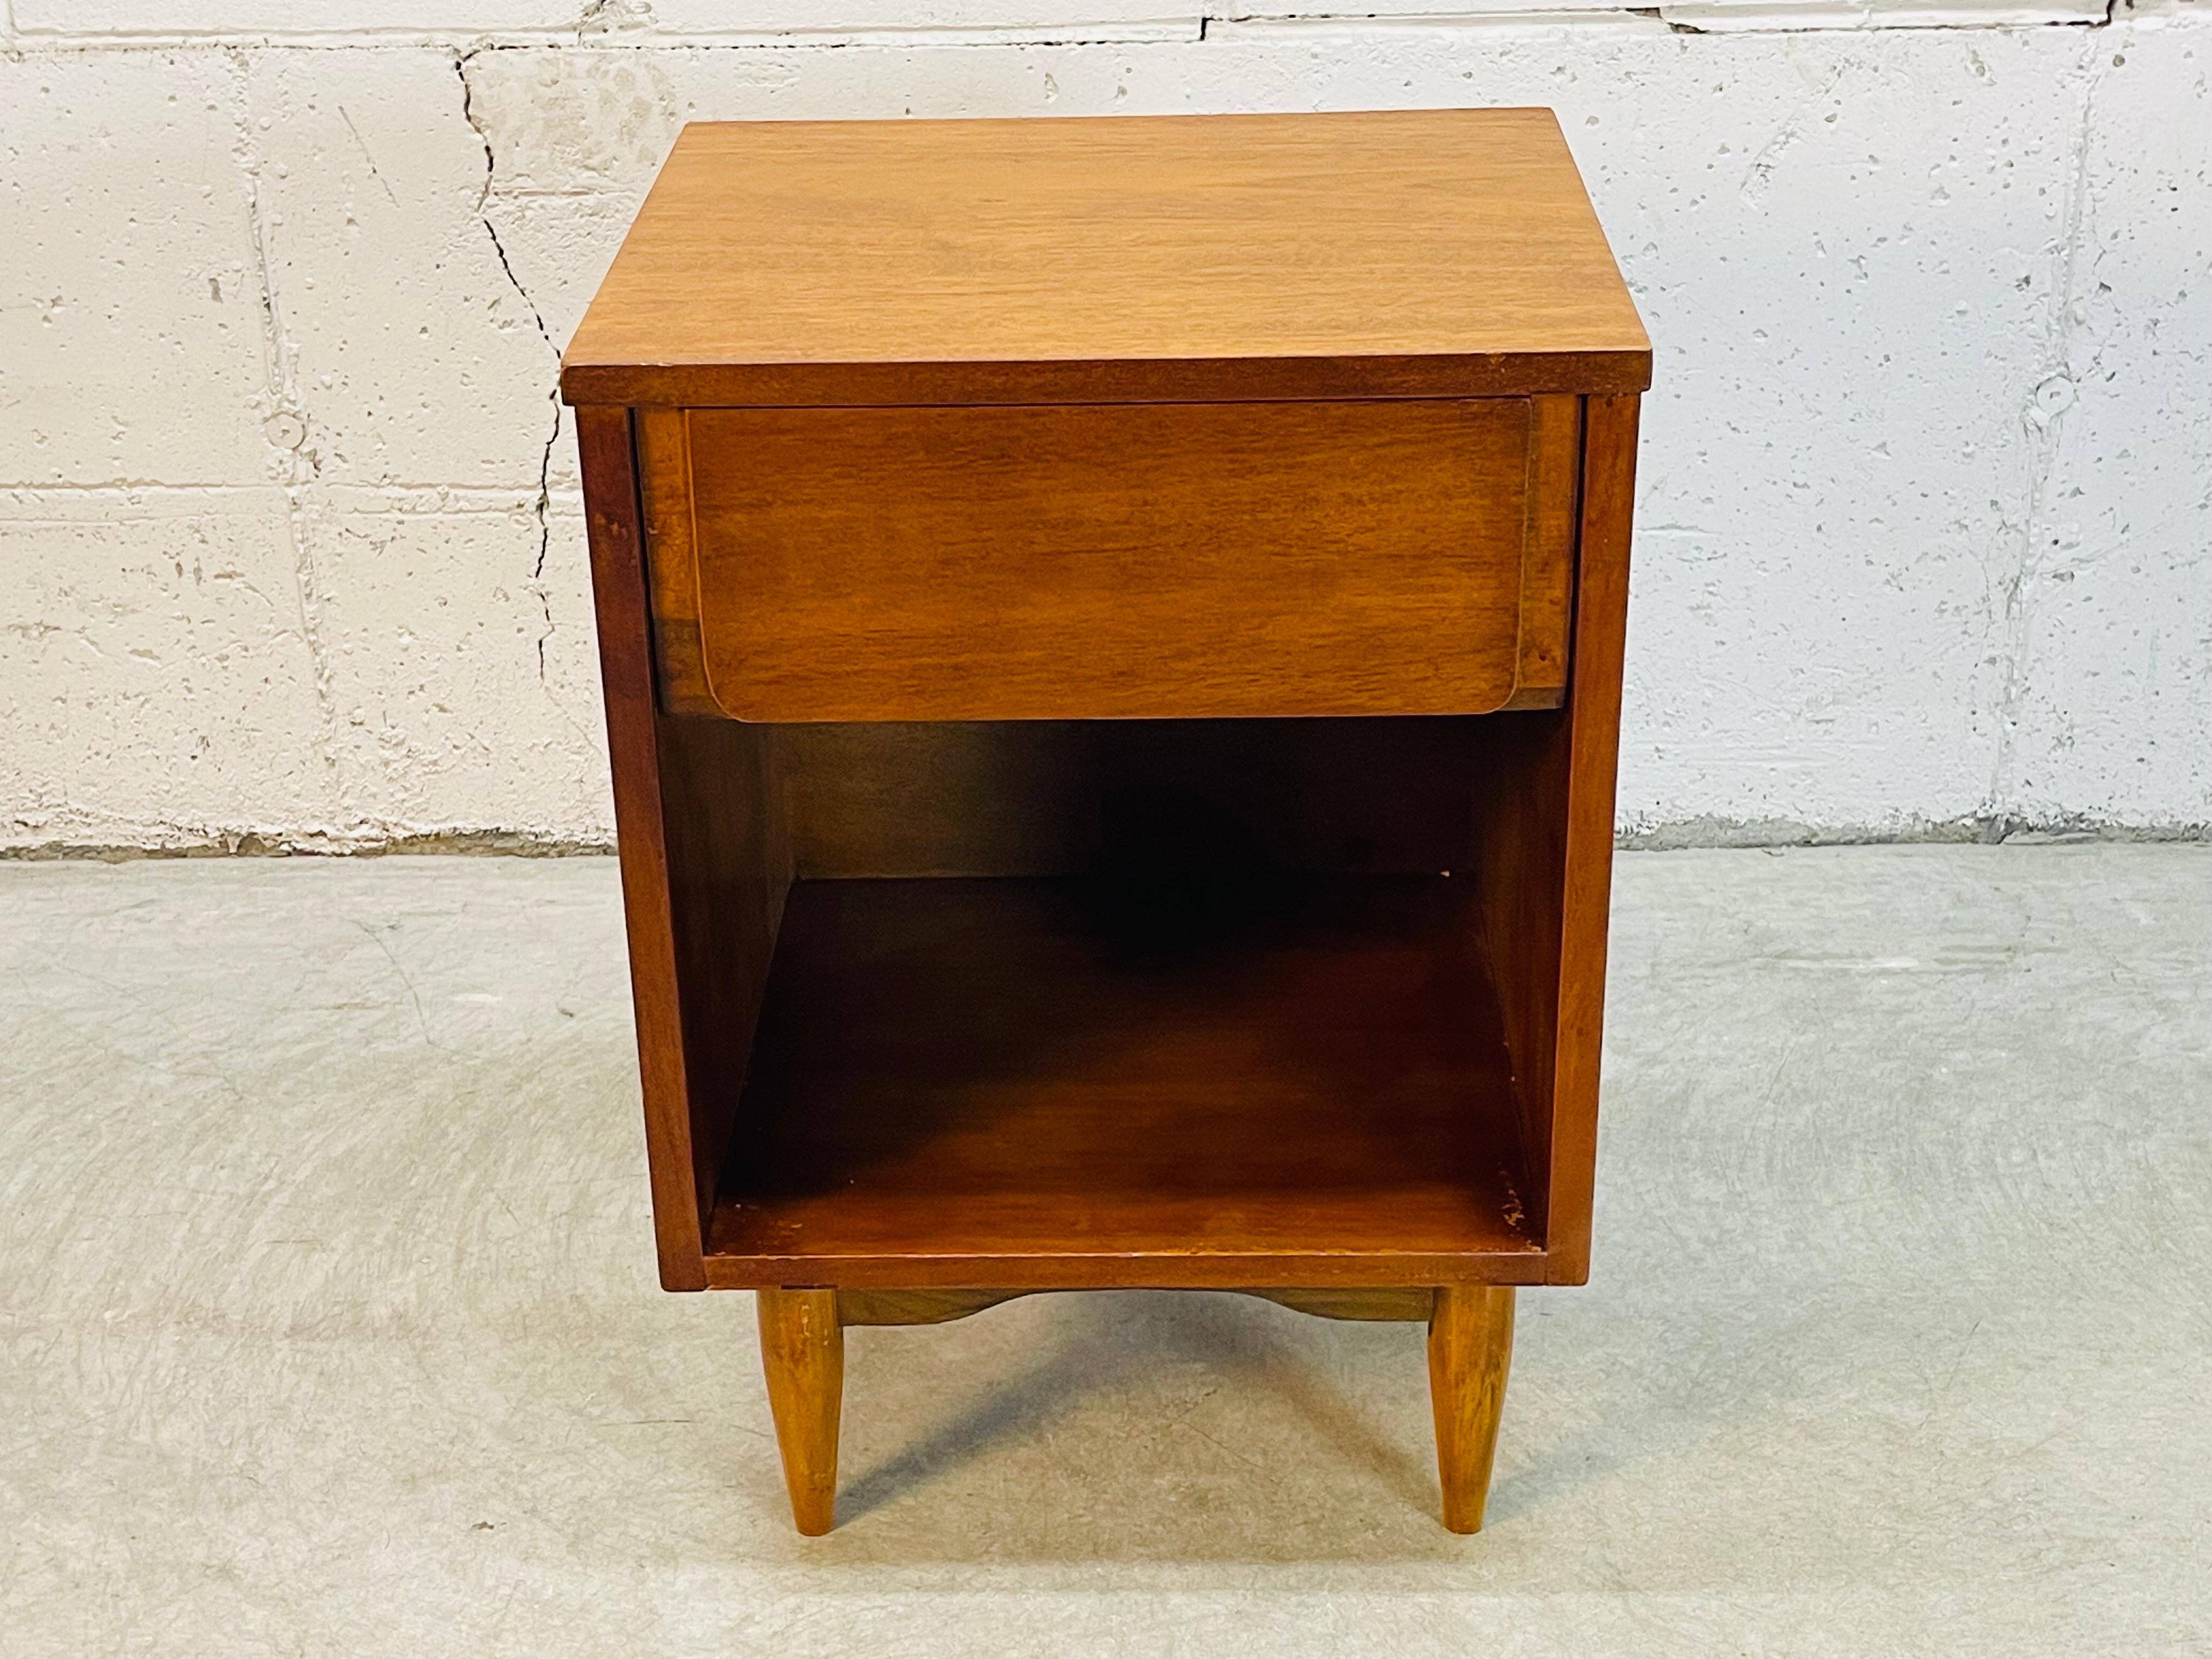 Vintage 1960s Mainline by Hooker Furniture walnut wood single drawer nightstand. The nightstand has open storage underneath and is marked inside the drawer. Newly refinished condition.